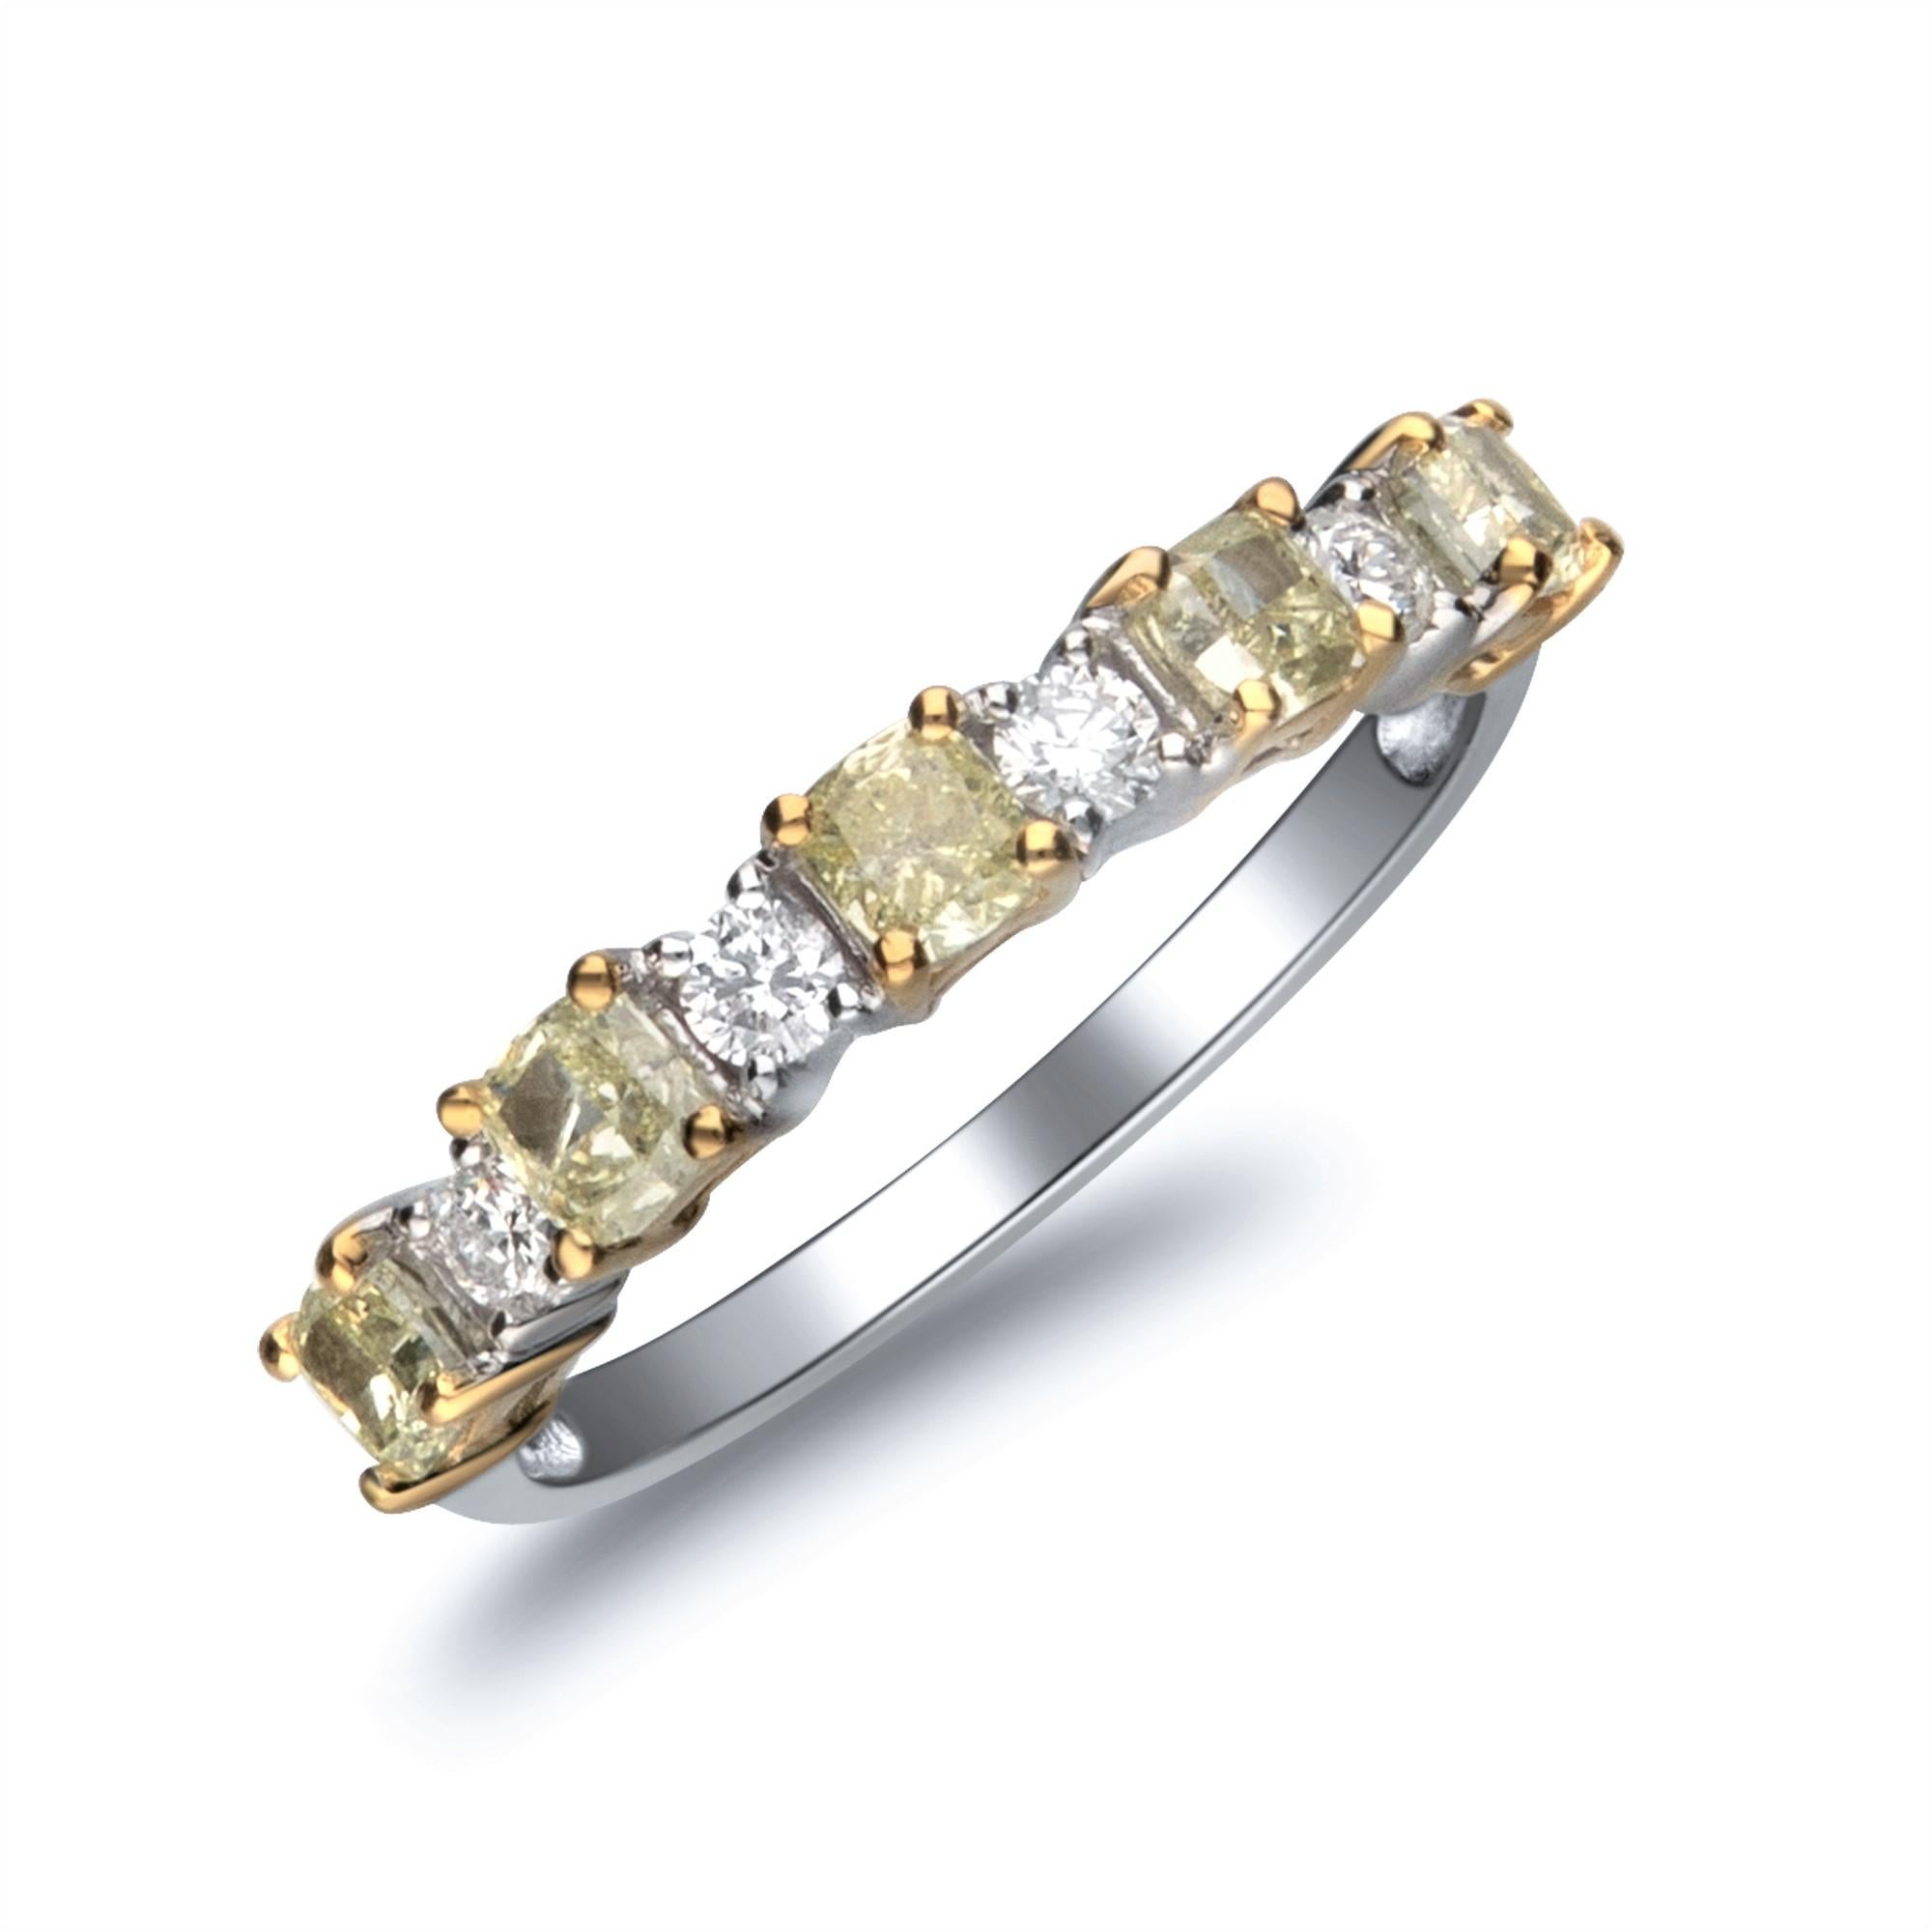 This one of a kind Gin and Grace band ring is crafted in 14-karat Two Tone gold and features five cushion cut Yellow Diamonds 0.79 carat & 4 glistening Round Diamonds 0.19 carat in SI quality. 
This ring comes in size 7, please contact us for more